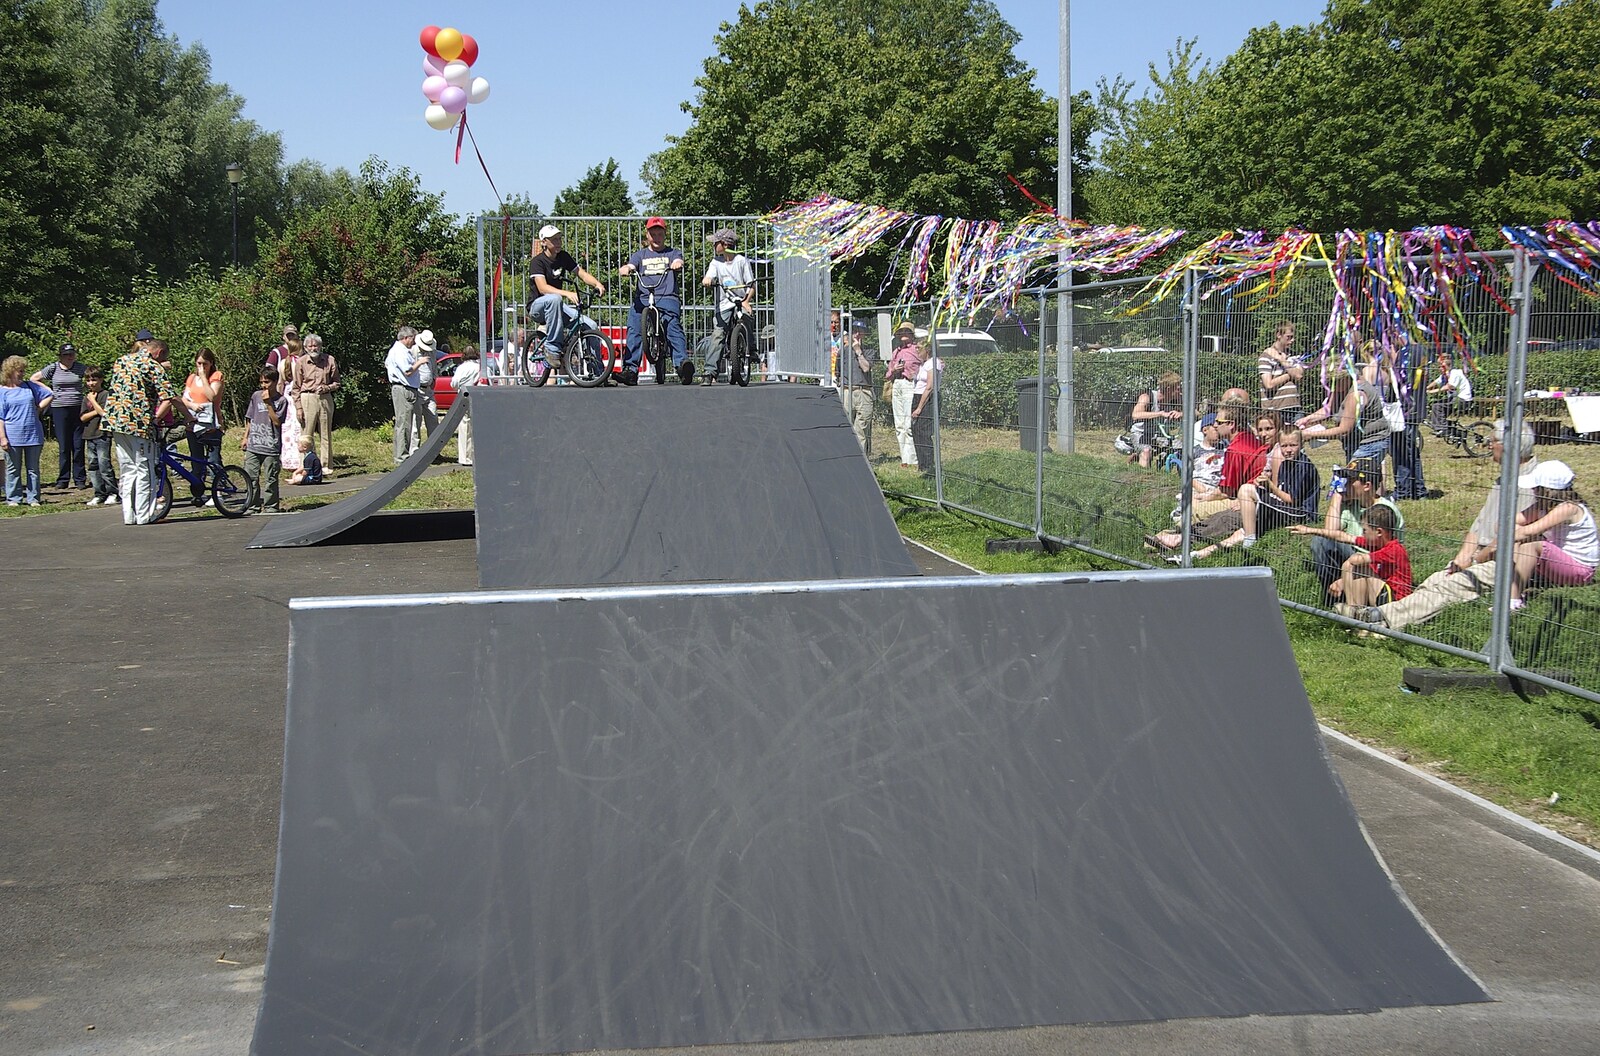 The Opening of Eye Skateboard Park, and The BBs at Cotton, Suffolk - 5th August 2007: A double ramp